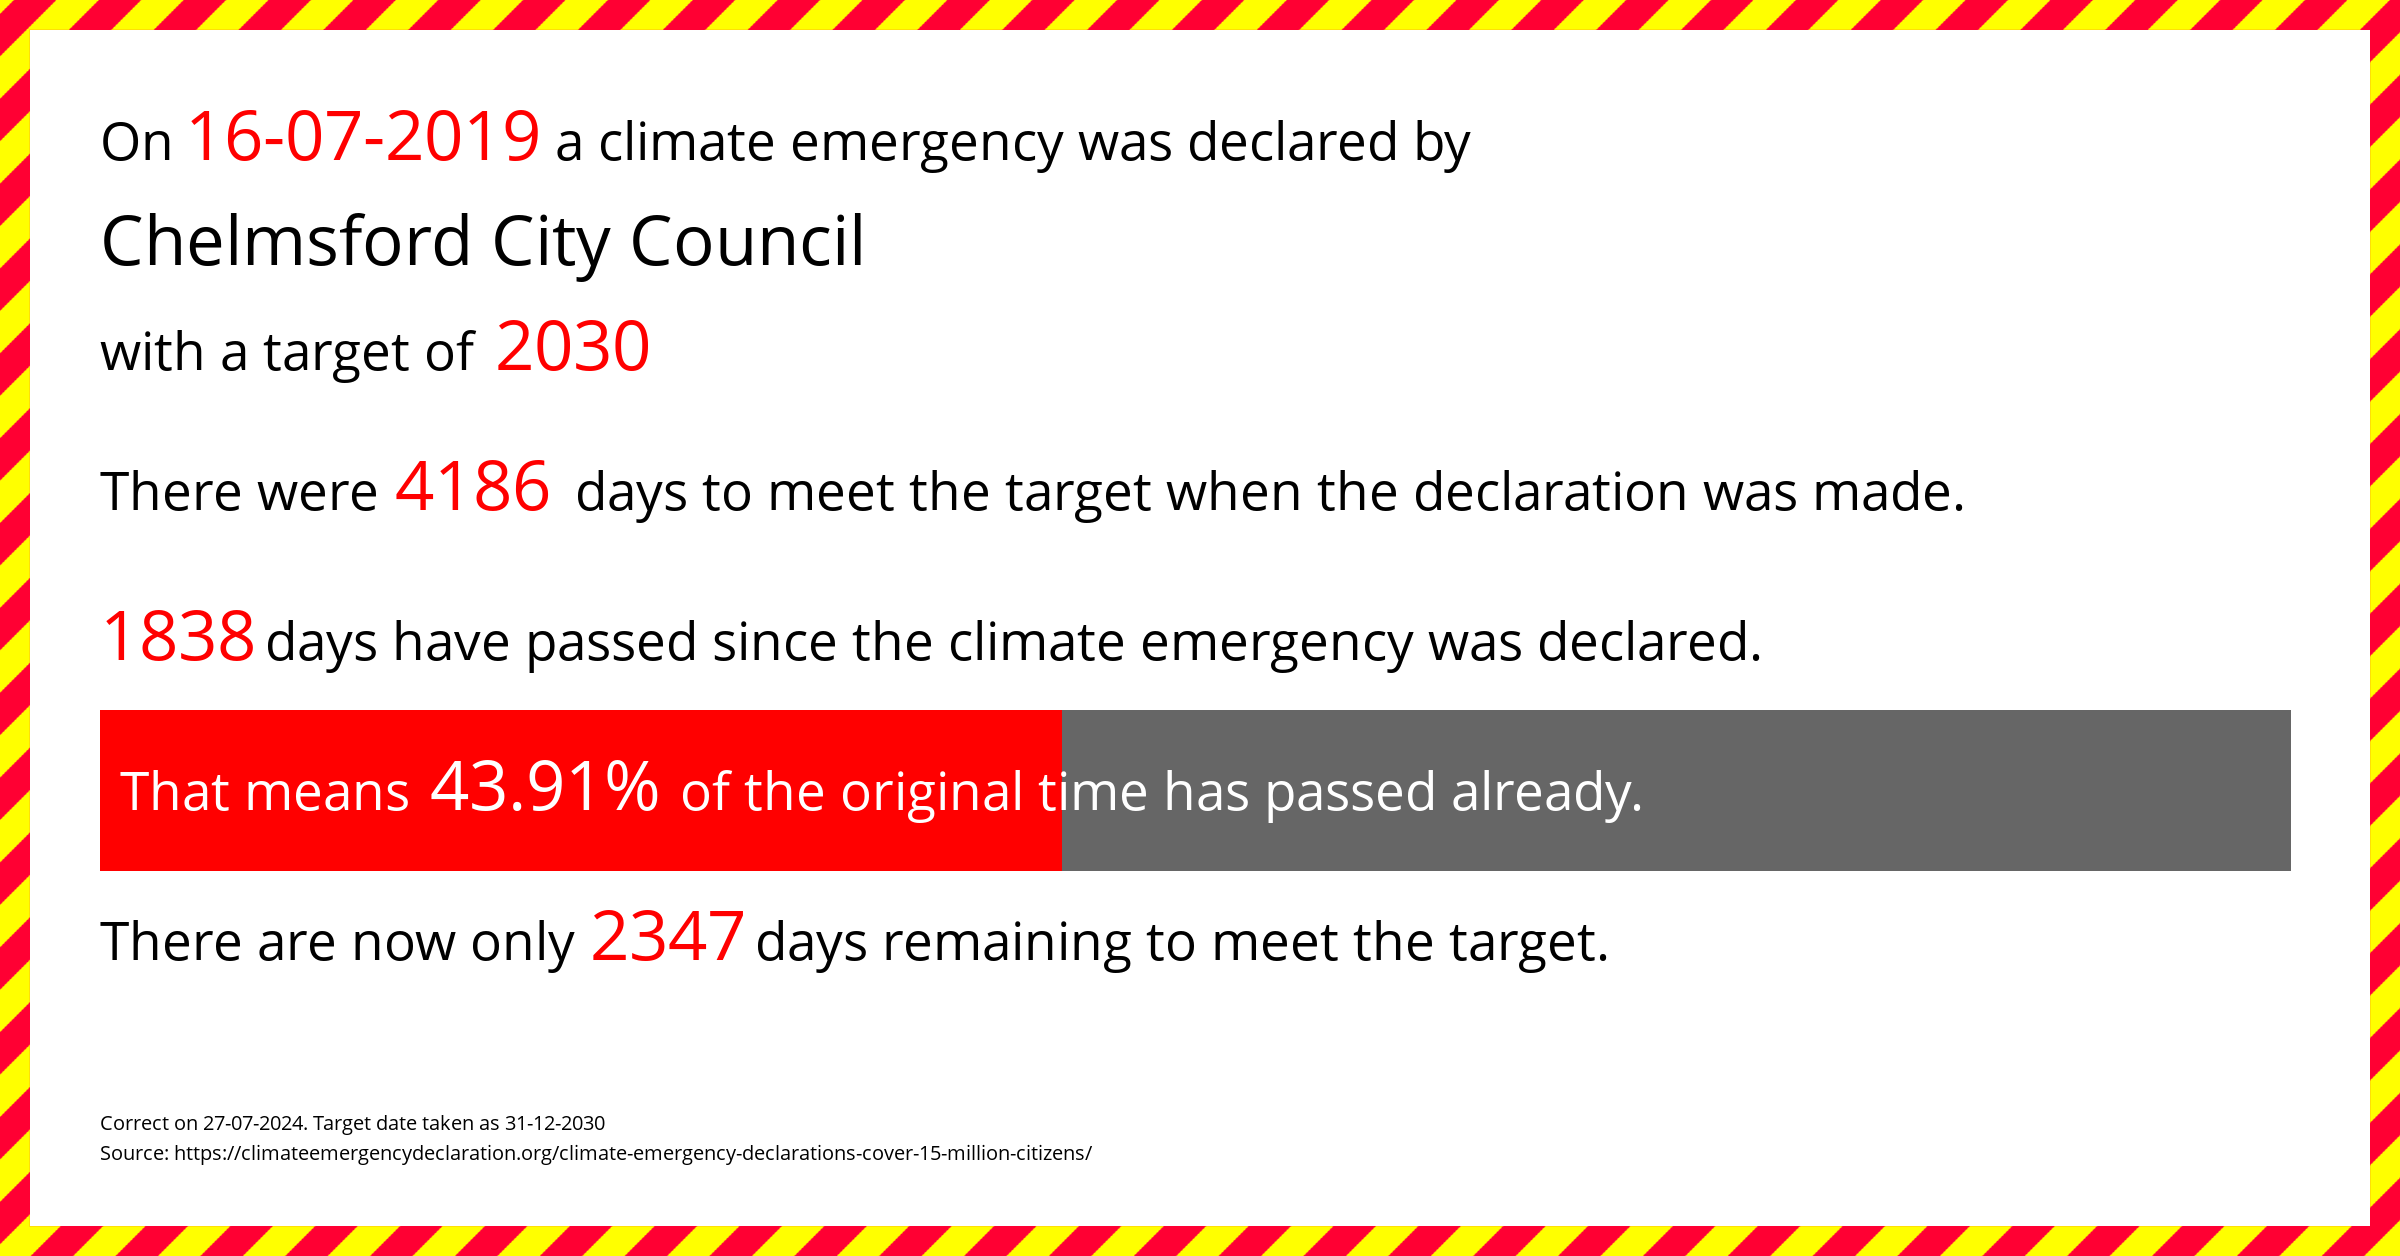 Chelmsford City Council declared a Climate emergency on Tuesday 16th July 2019, with a target of 2030.